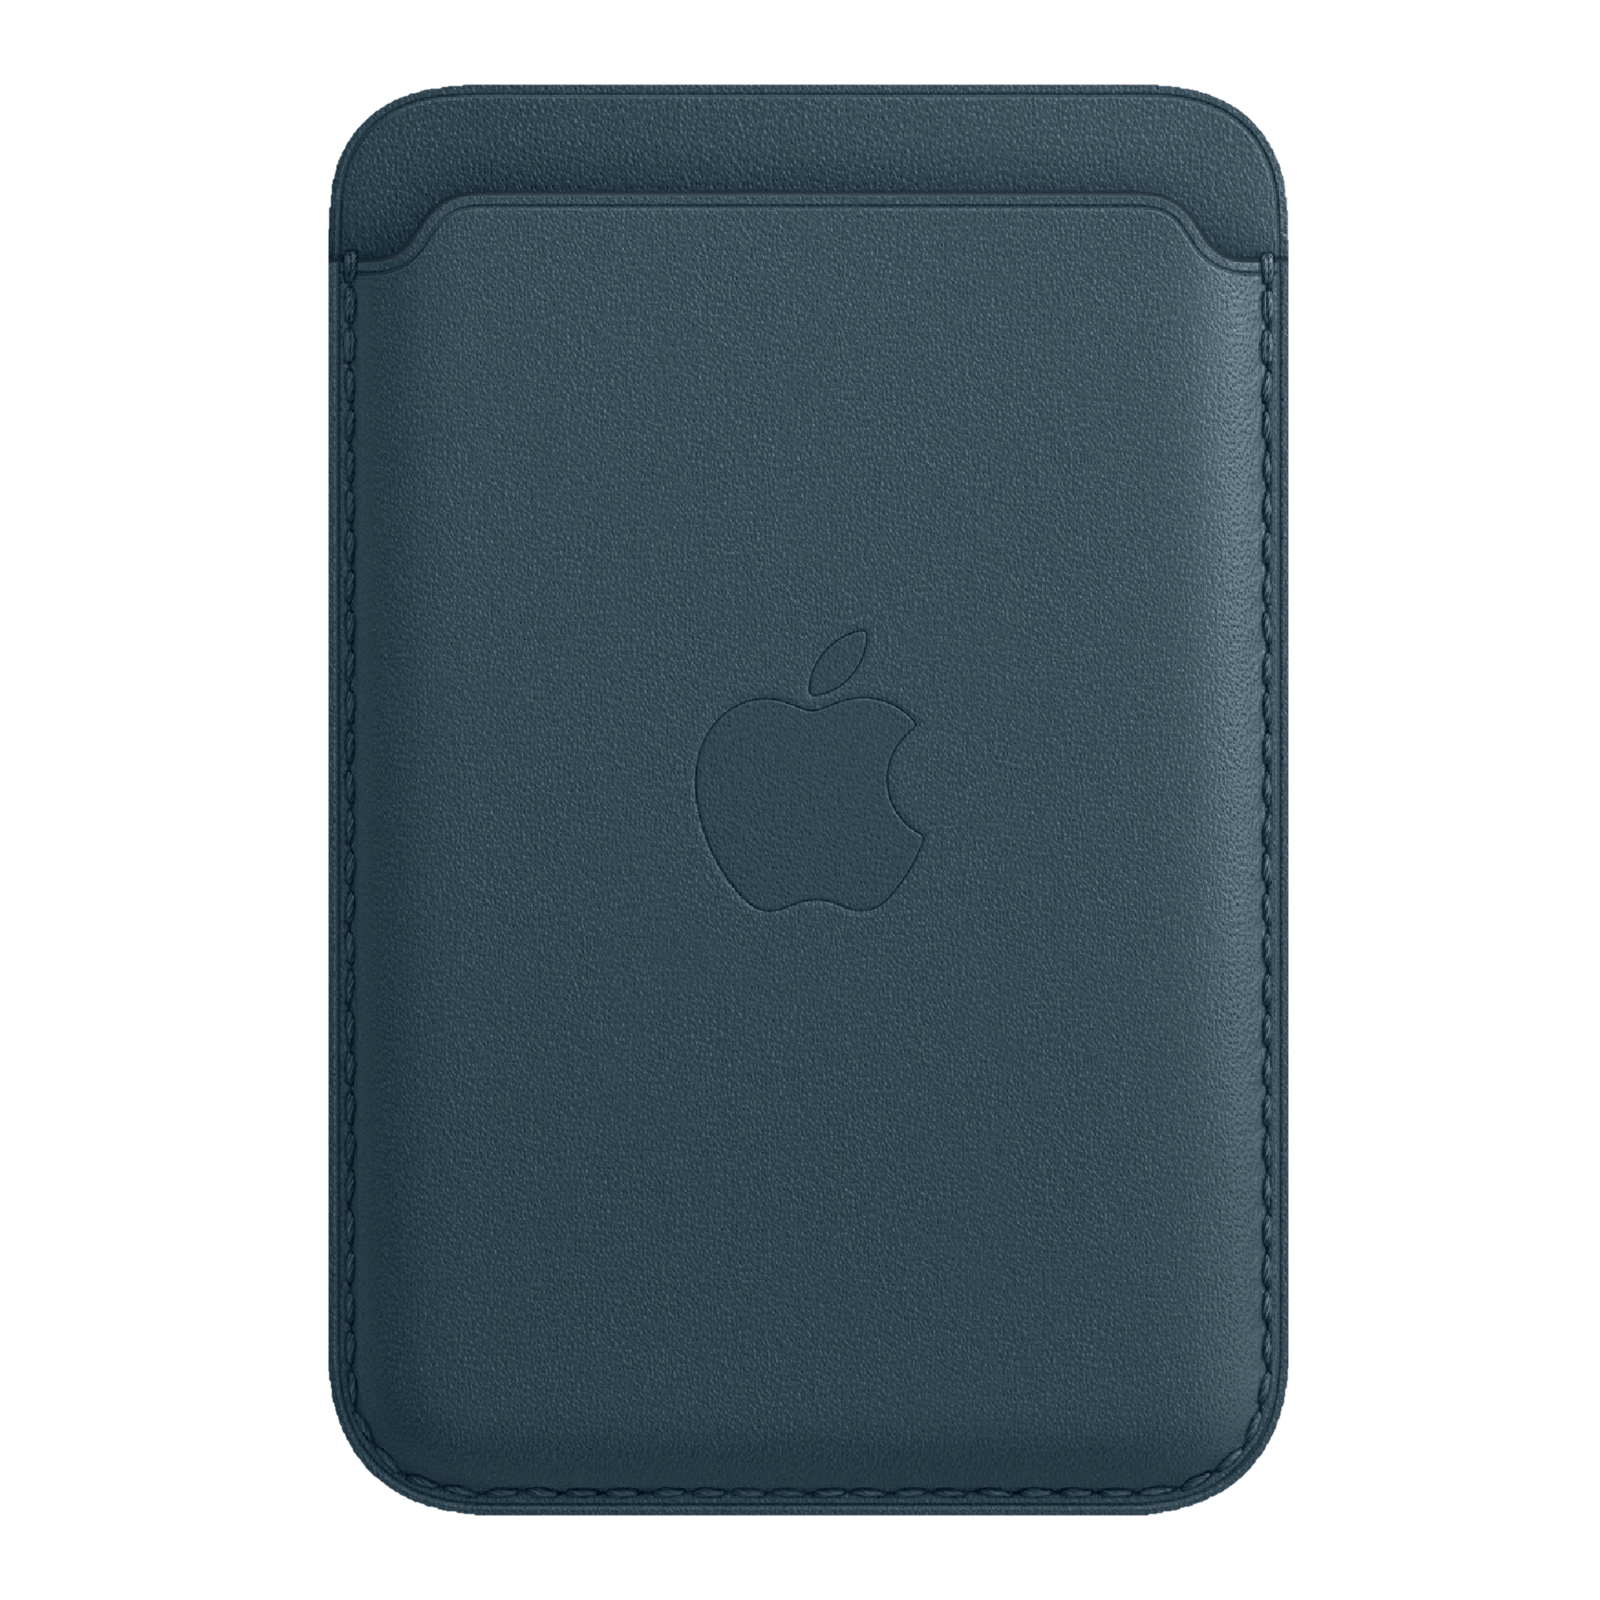 Buy Apple MagSafe Leather Wallet for iPhone 12, 12 Pro Max, 12 Pro, 12 Mini  (Strong Built-in Magnets, Baltic Blue) Online - Croma